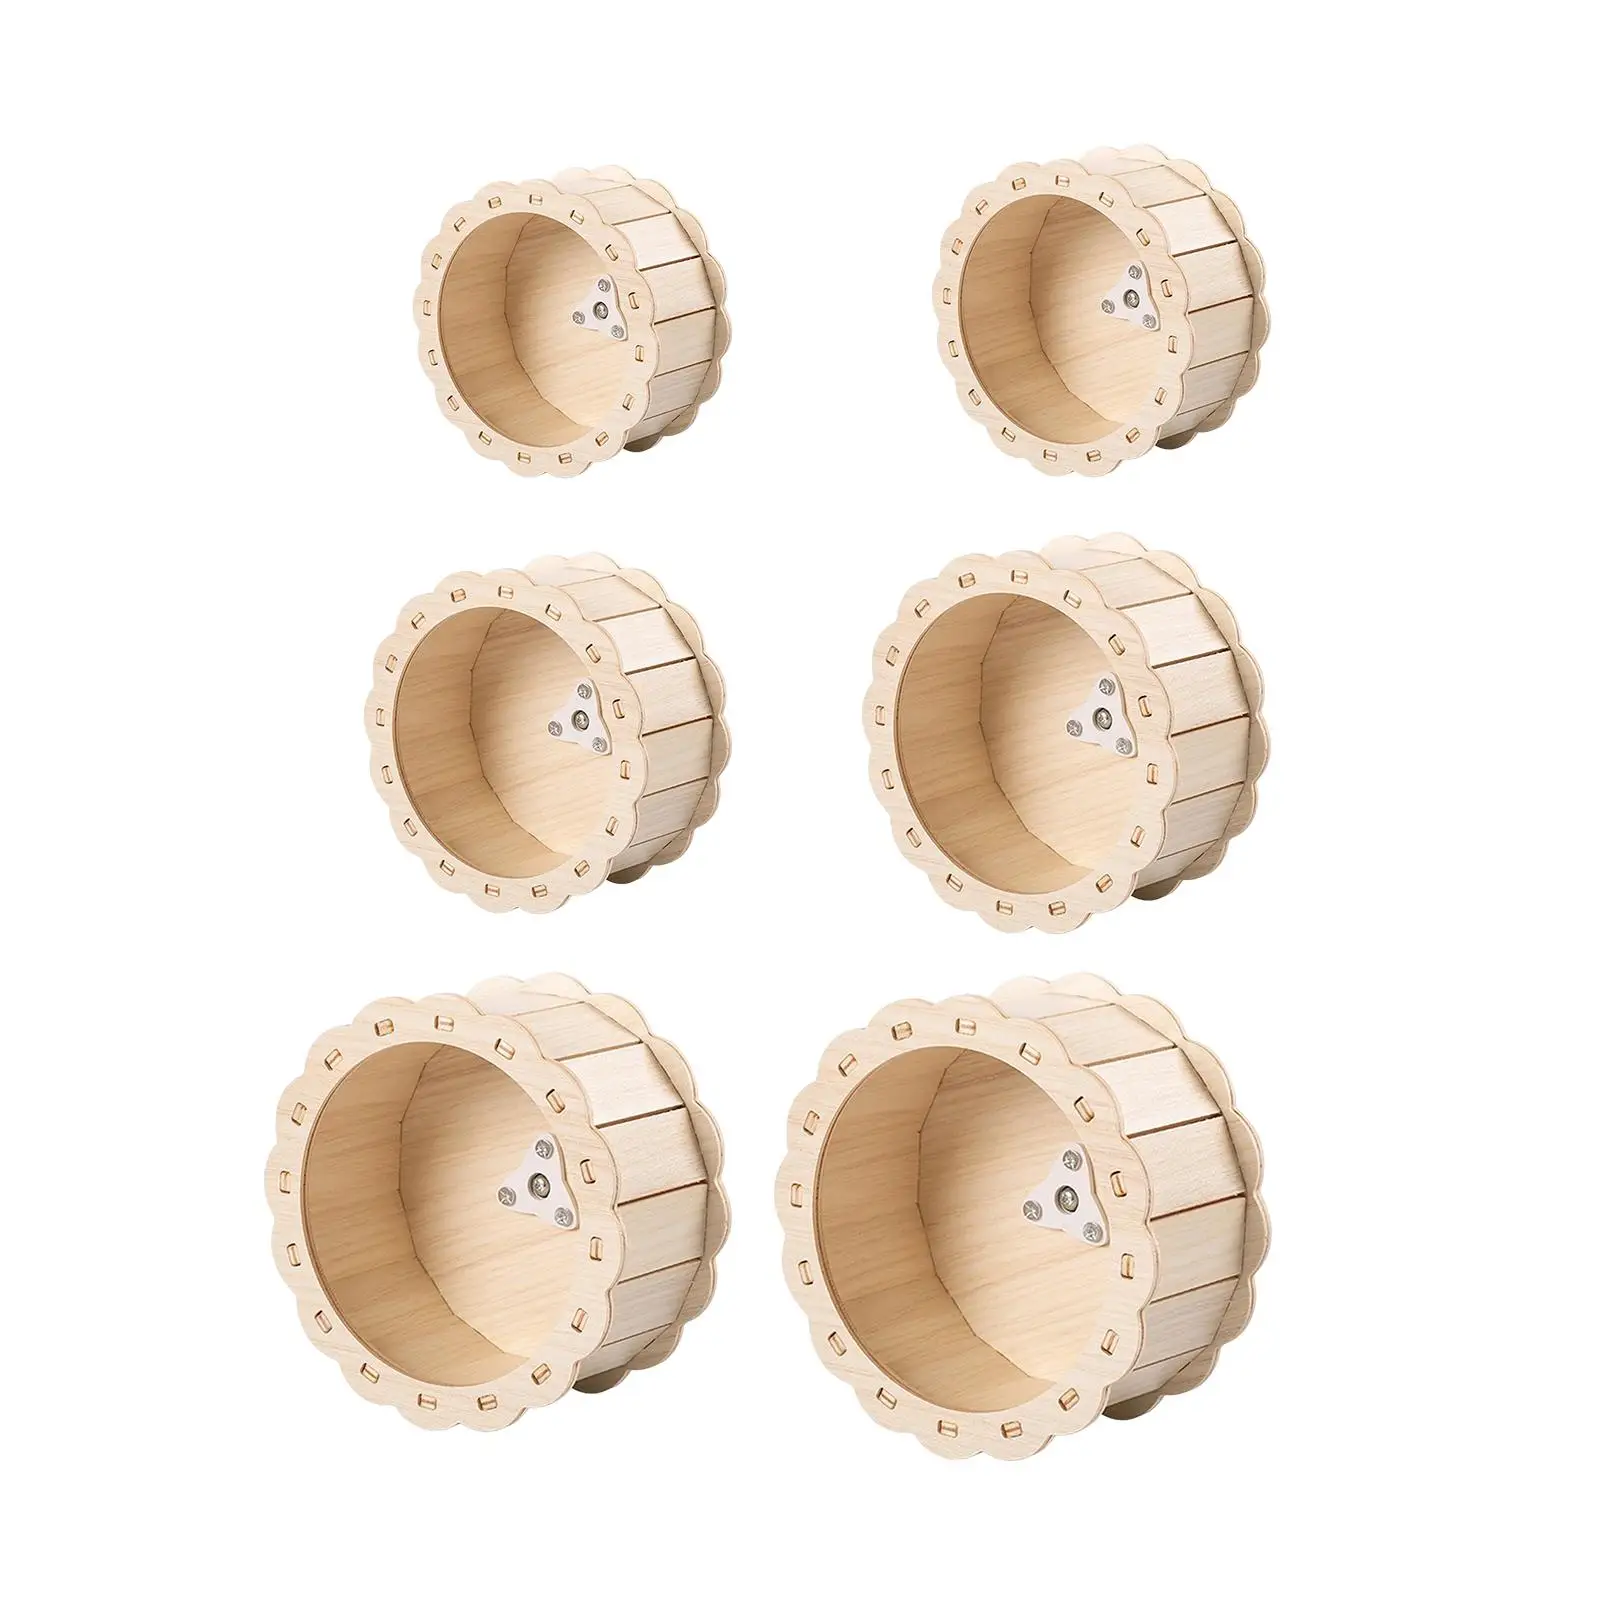 Treadmill Quiet for Cage Hamster Toys Exercise Wheel Hamster Wooden Running Wheel for Mice Kitty Hedgehog Rat Dwarf Hamster